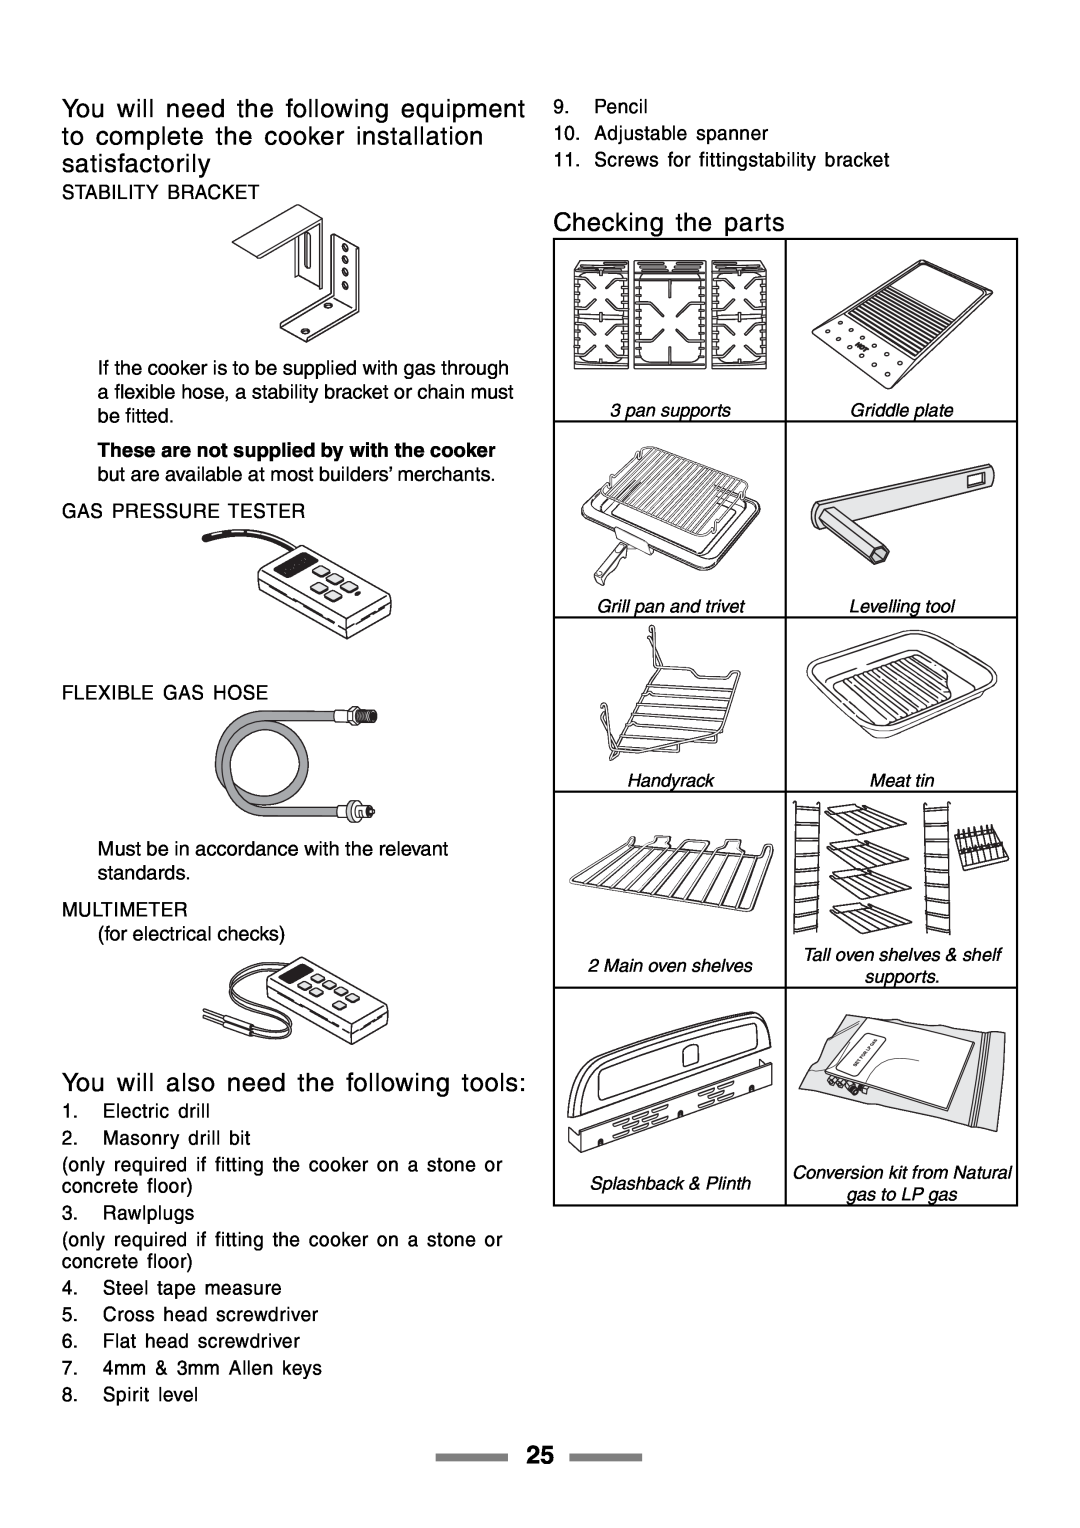 Rangemaster 90 manual You will also need the following tools, Checking the parts 